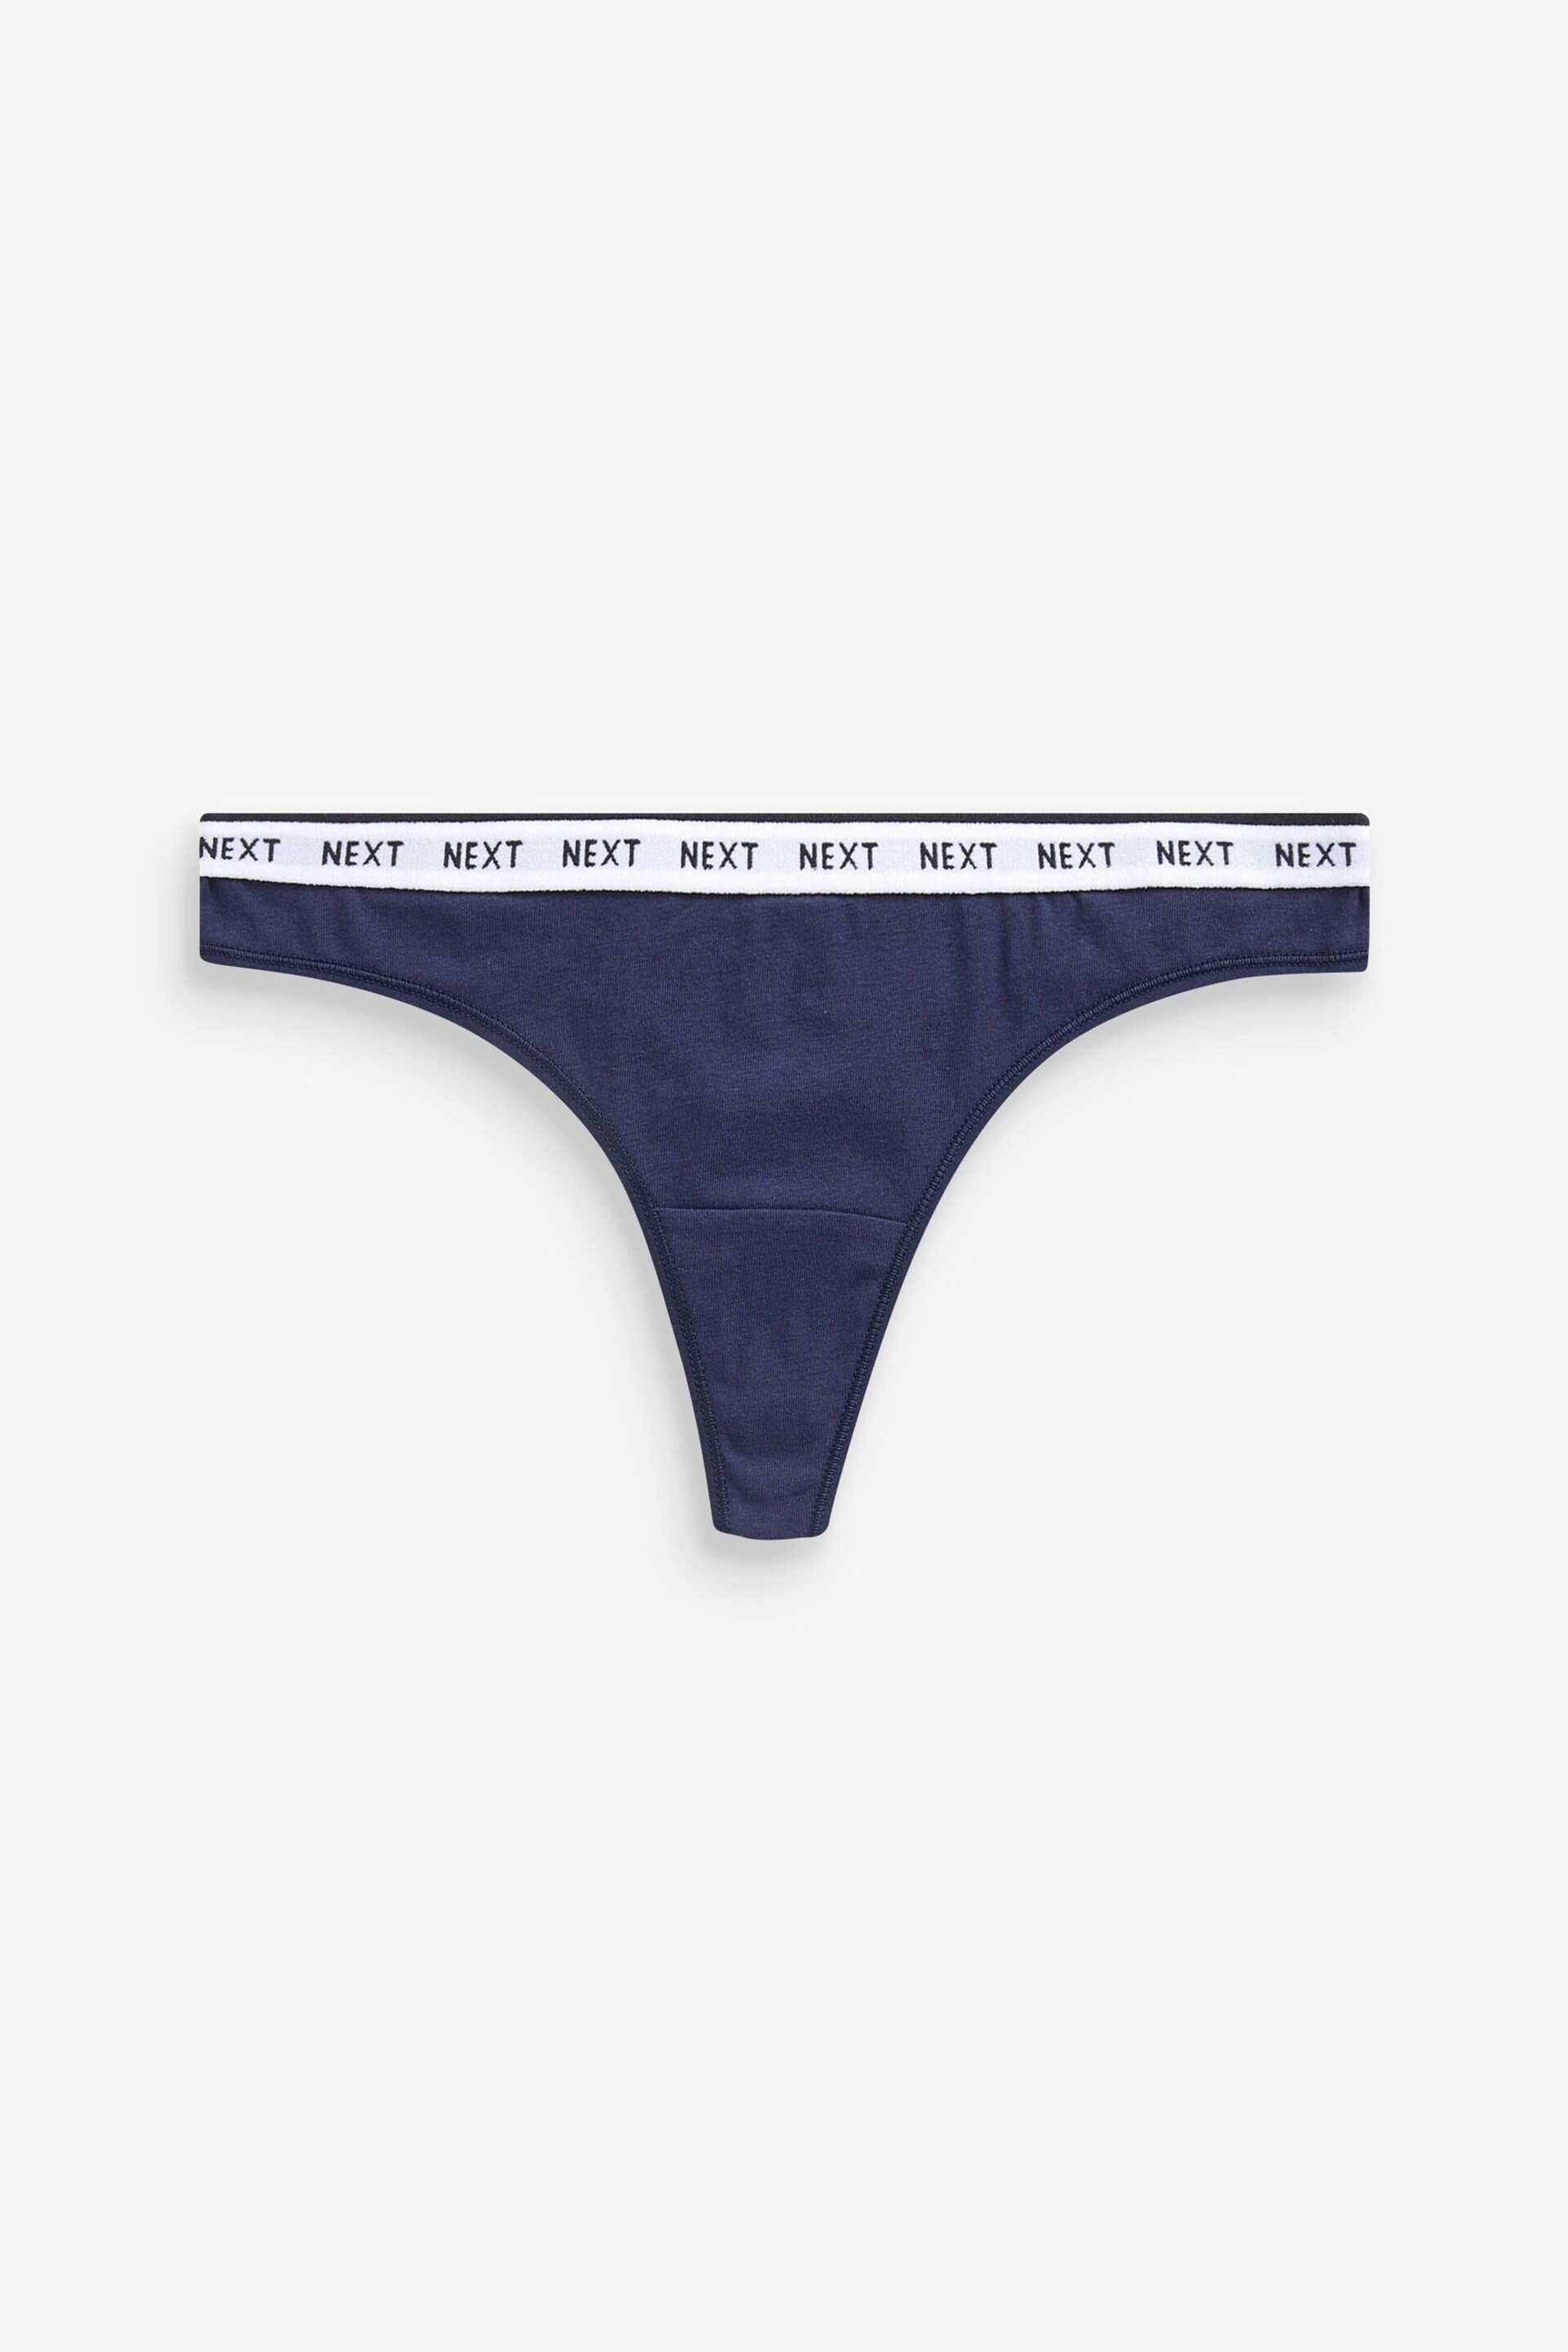 Navy/ Pink Spot Thong Cotton Rich Logo Knickers 4 Pack - Image 7 of 8